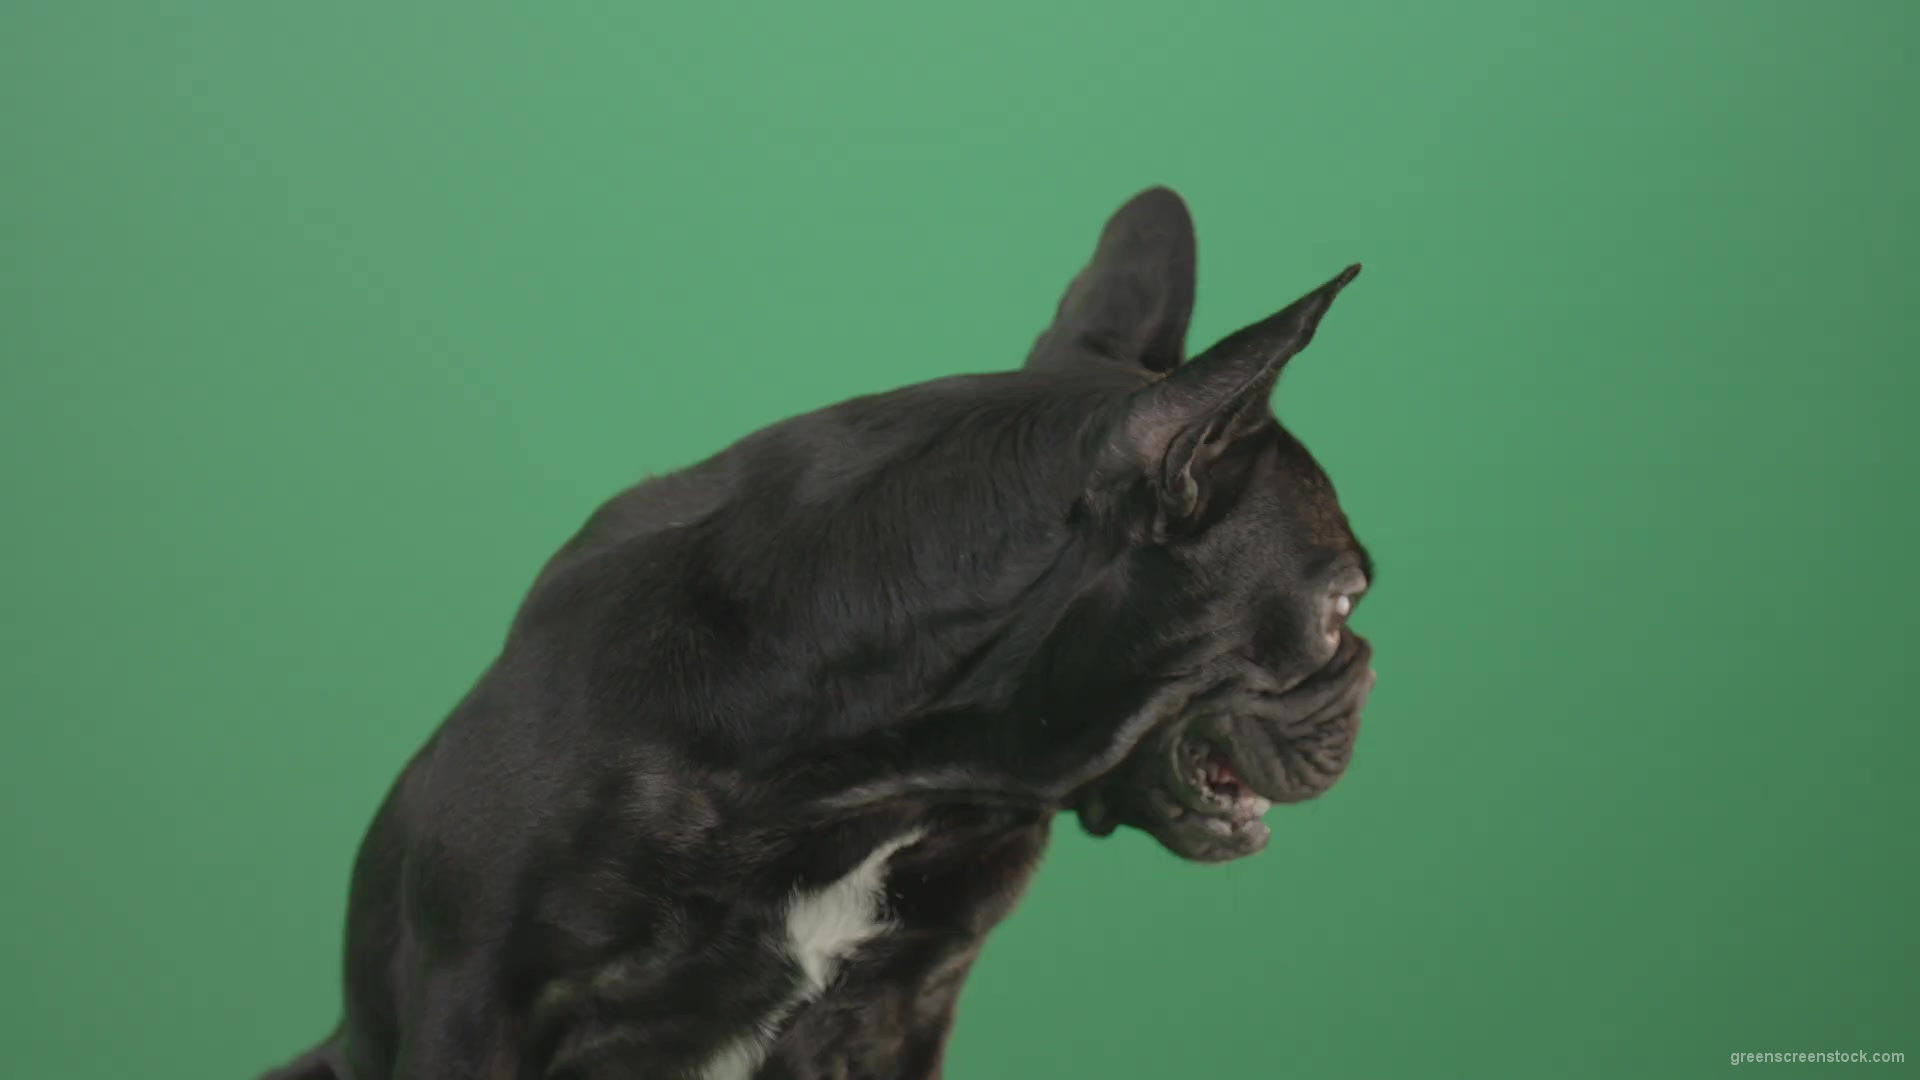 Face-portrait-of-scared-french-bulldog-toy-dog-isolated-on-green-screen-1920_001 Green Screen Stock